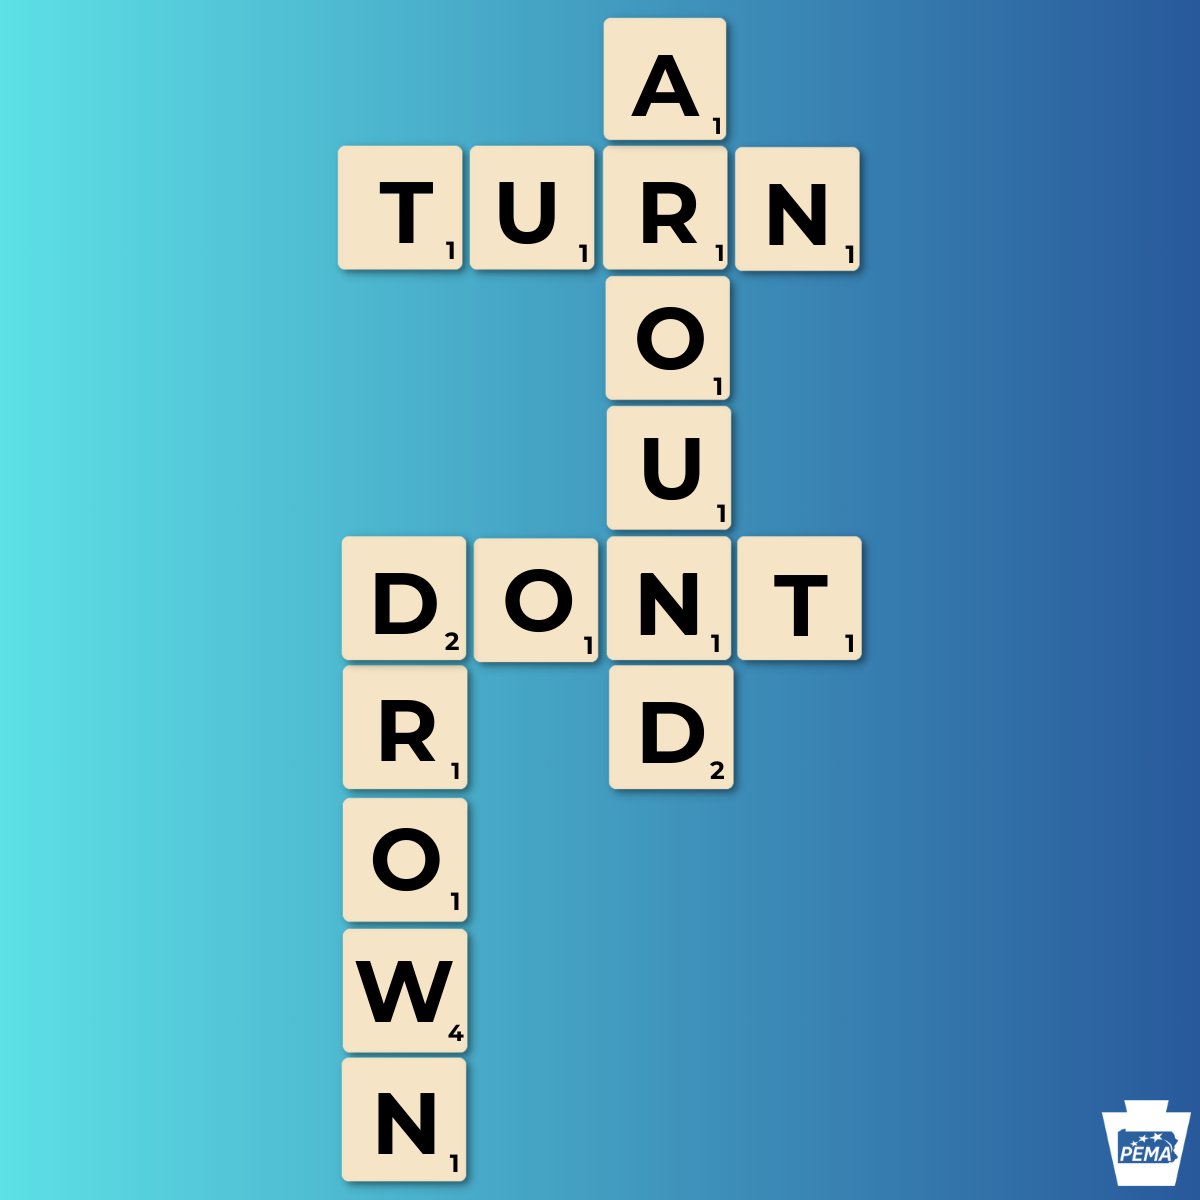 You don't have to scrabble for flood safety info — you have us! 🌧 6 inches of flood water can stall a car. Turn around, don't drown. 👀Follow trusted local news and weather stations for alerts. ❌ Consider canceling travel plans during a flash flood watch. #ScrabbleDay